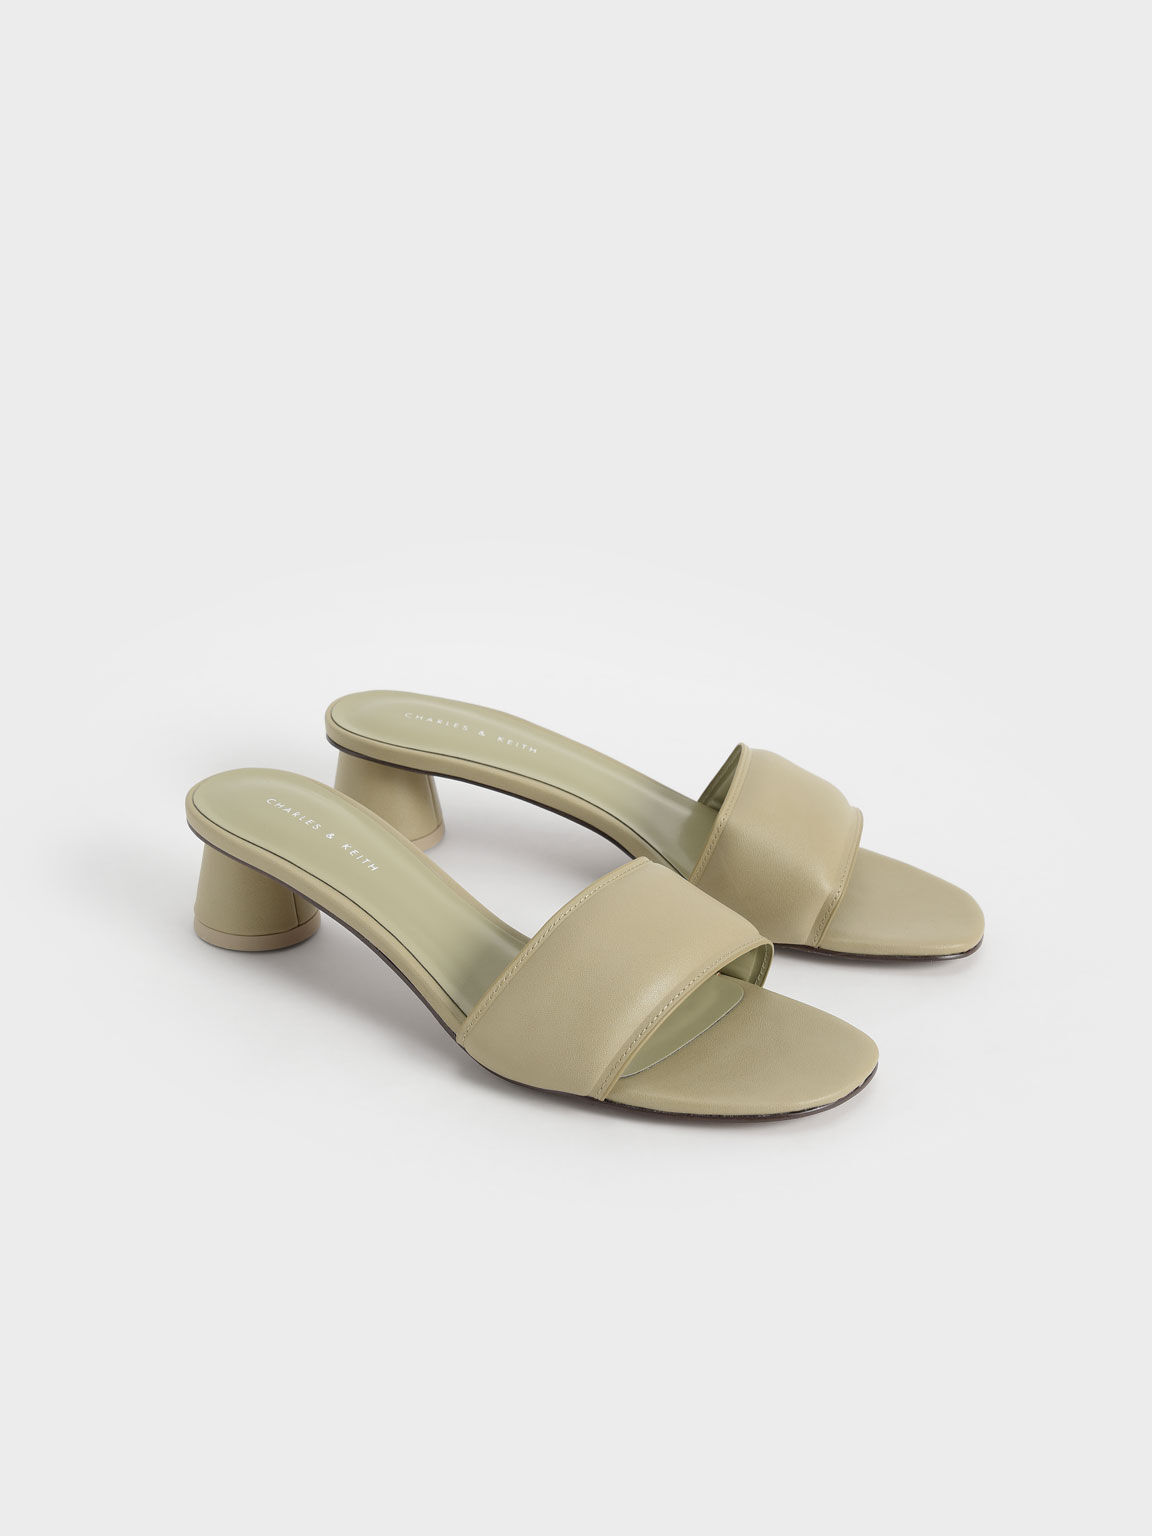 Puffy Cylindrical Heel Mules, Taupe, hi-res